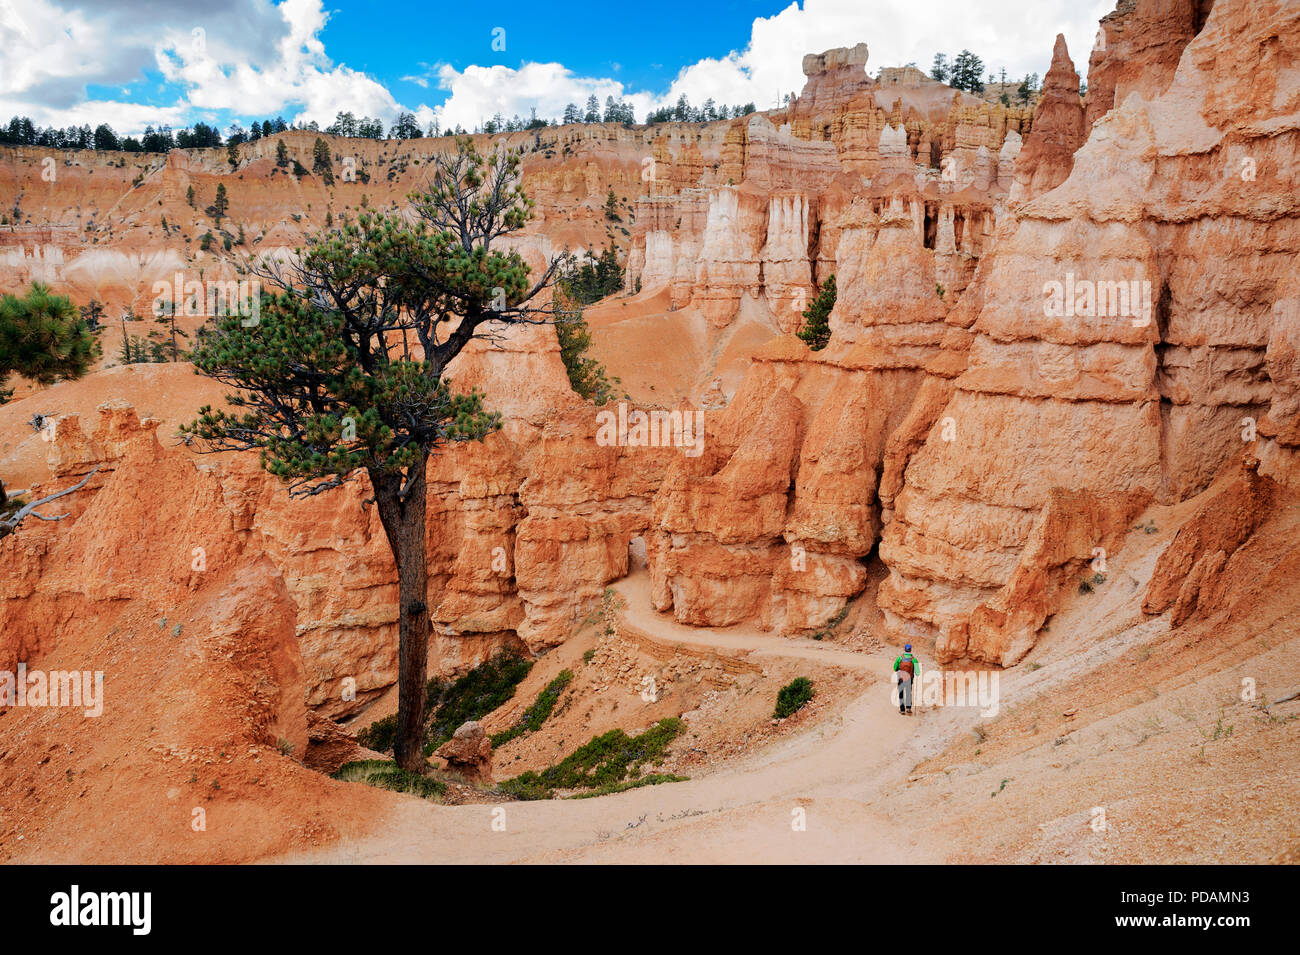 Lone hiker walking on the Queens Garden trail, Bryce Canyon National Park, Utah. Stock Photo